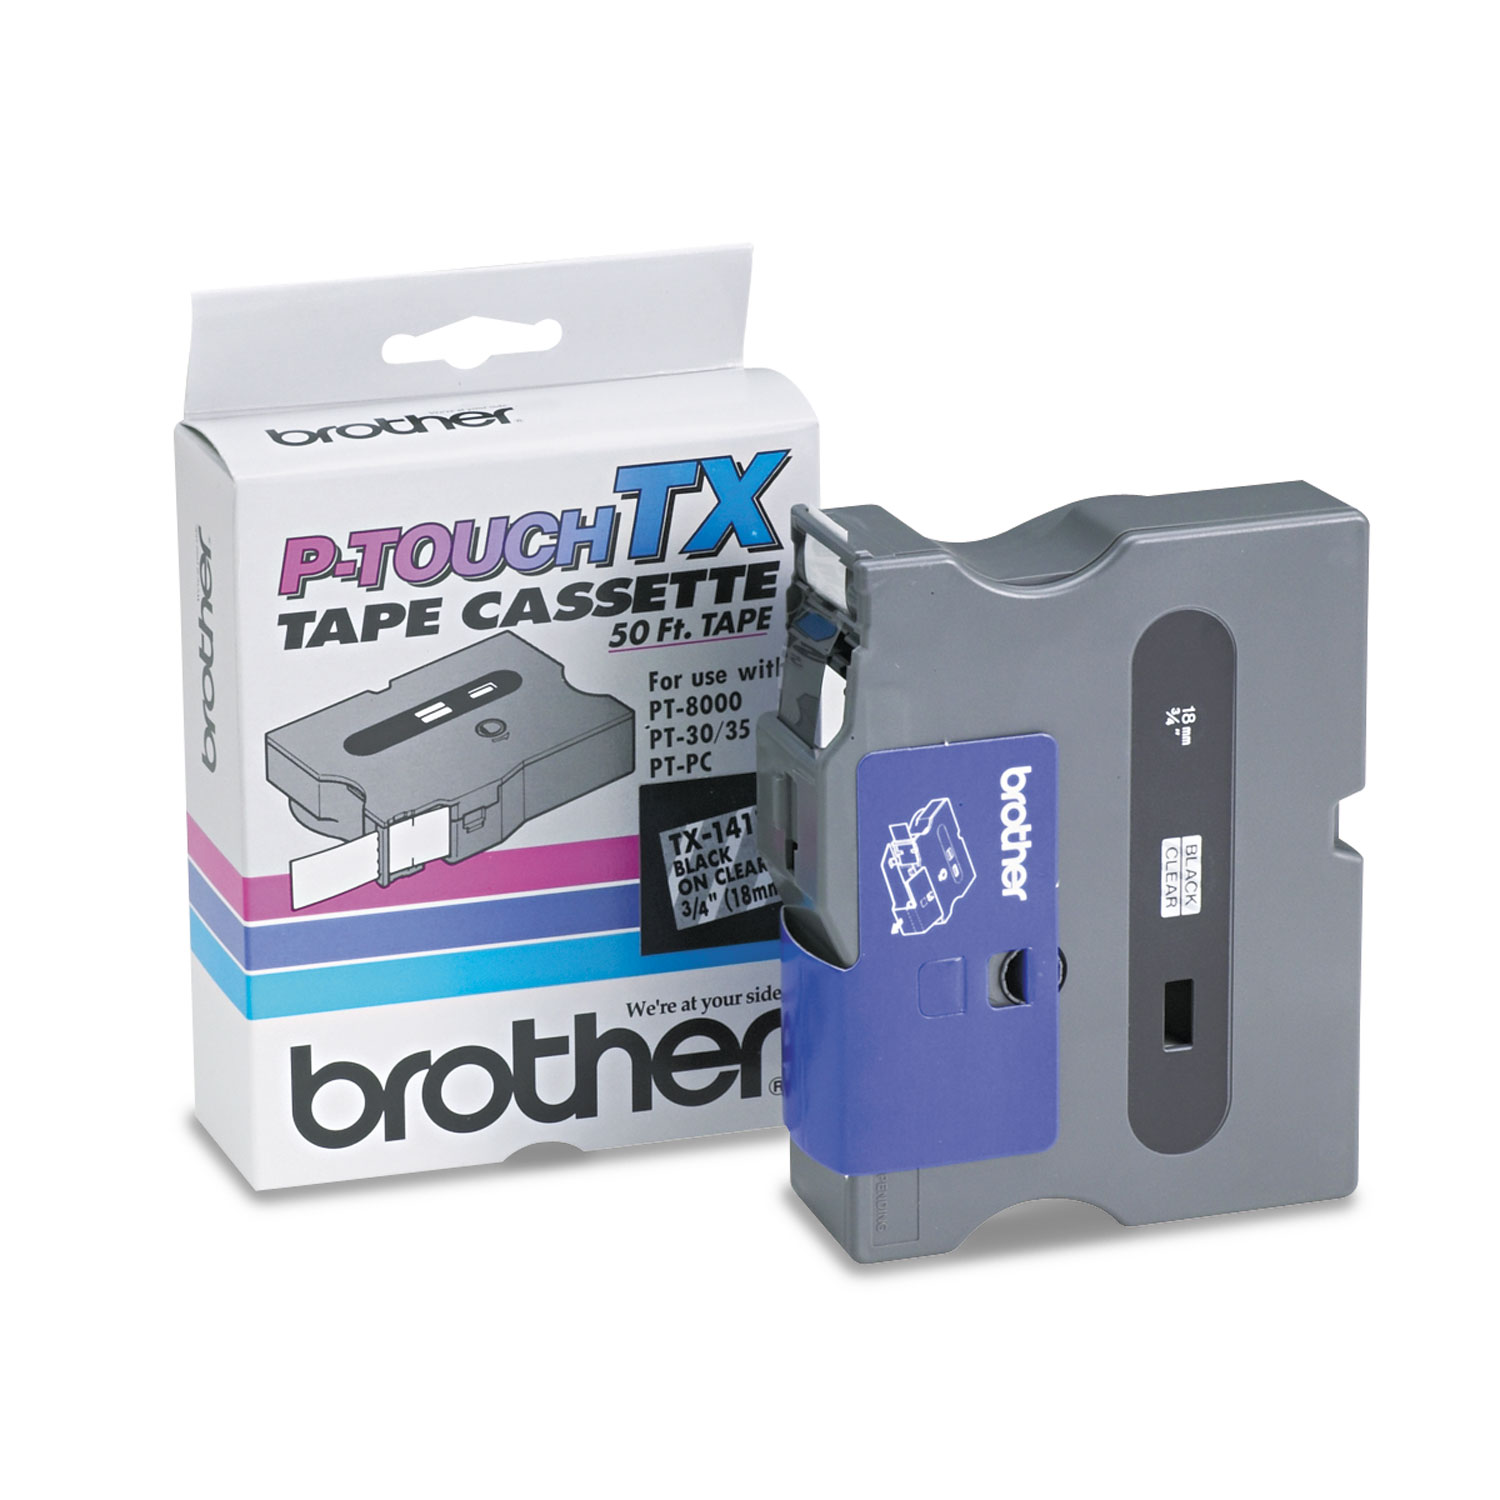  Brother P-Touch TX1411 TX Tape Cartridge for PT-8000, PT-PC, PT-30/35, 0.7 x 50 ft, Black on Clear (BRTTX1411) 